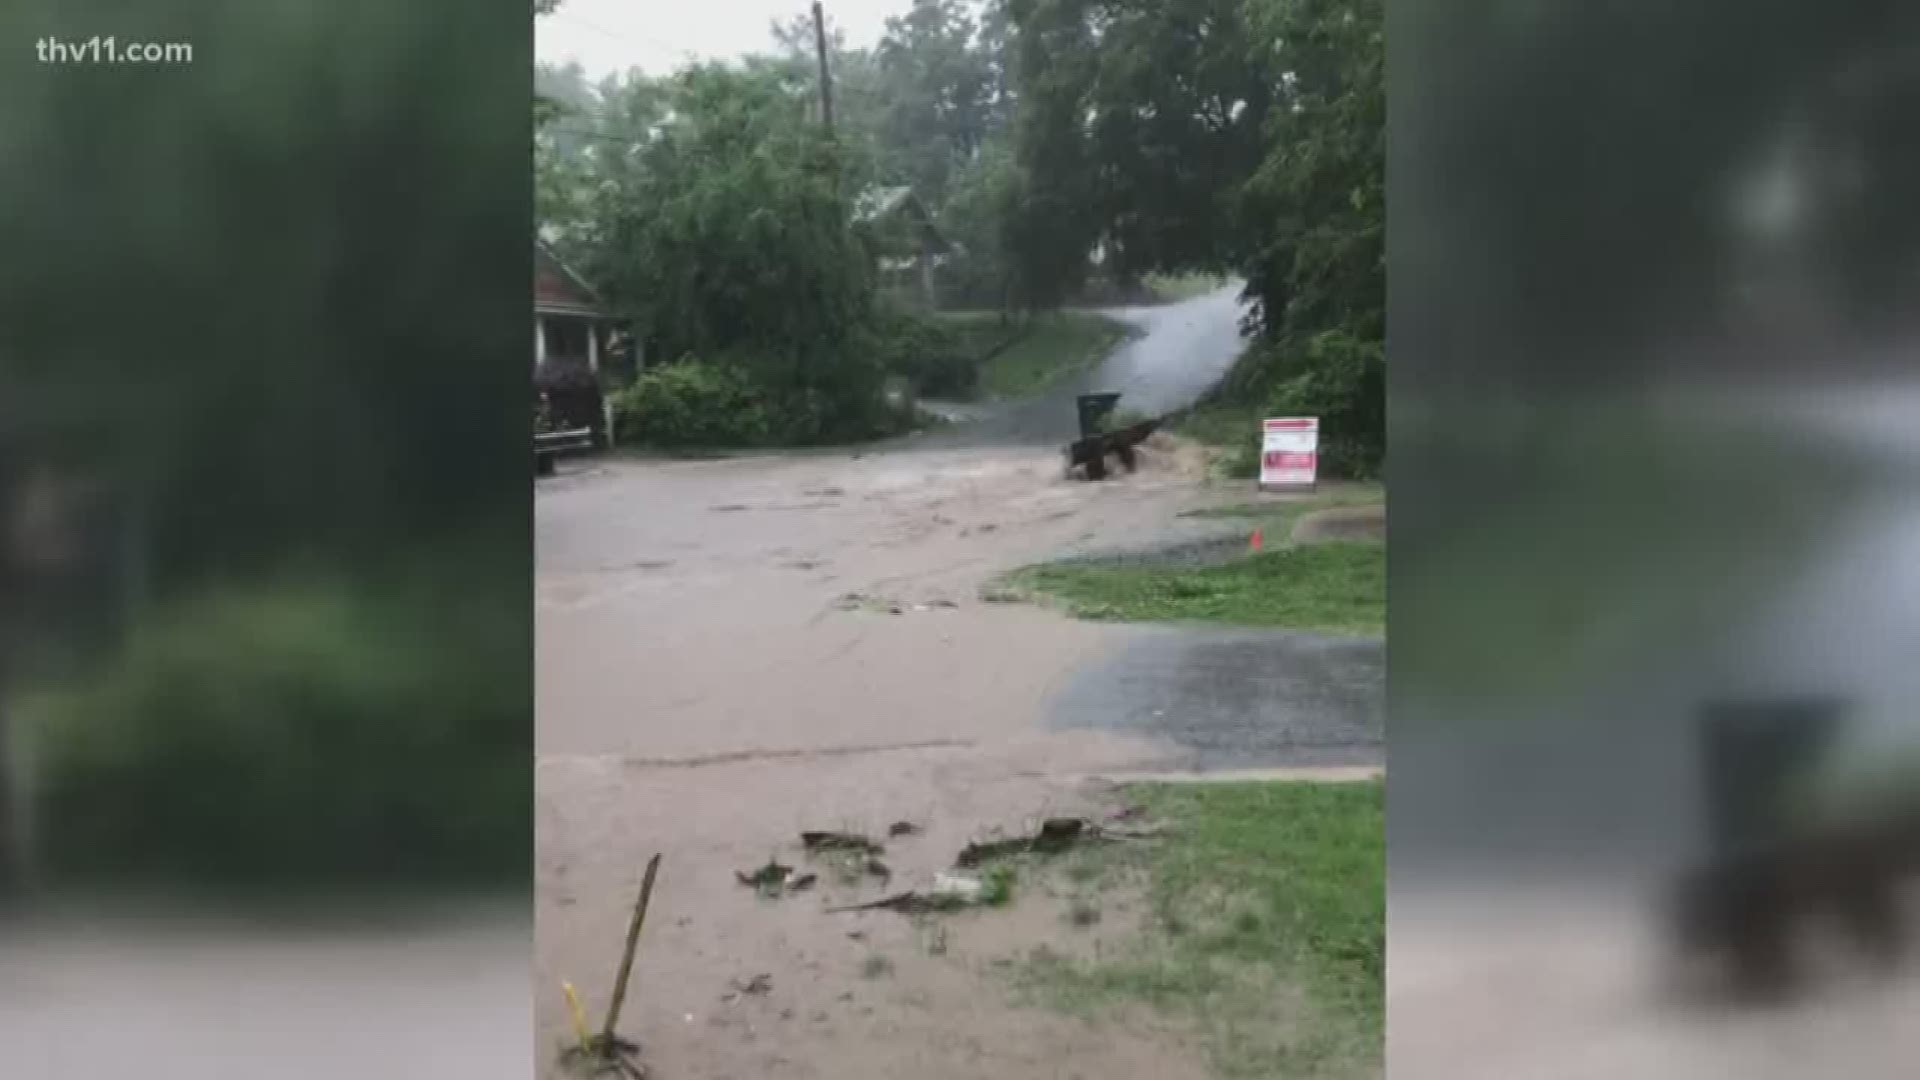 Residents reported creeks and streets overflowing, causing damage that insurance doesn't cover.